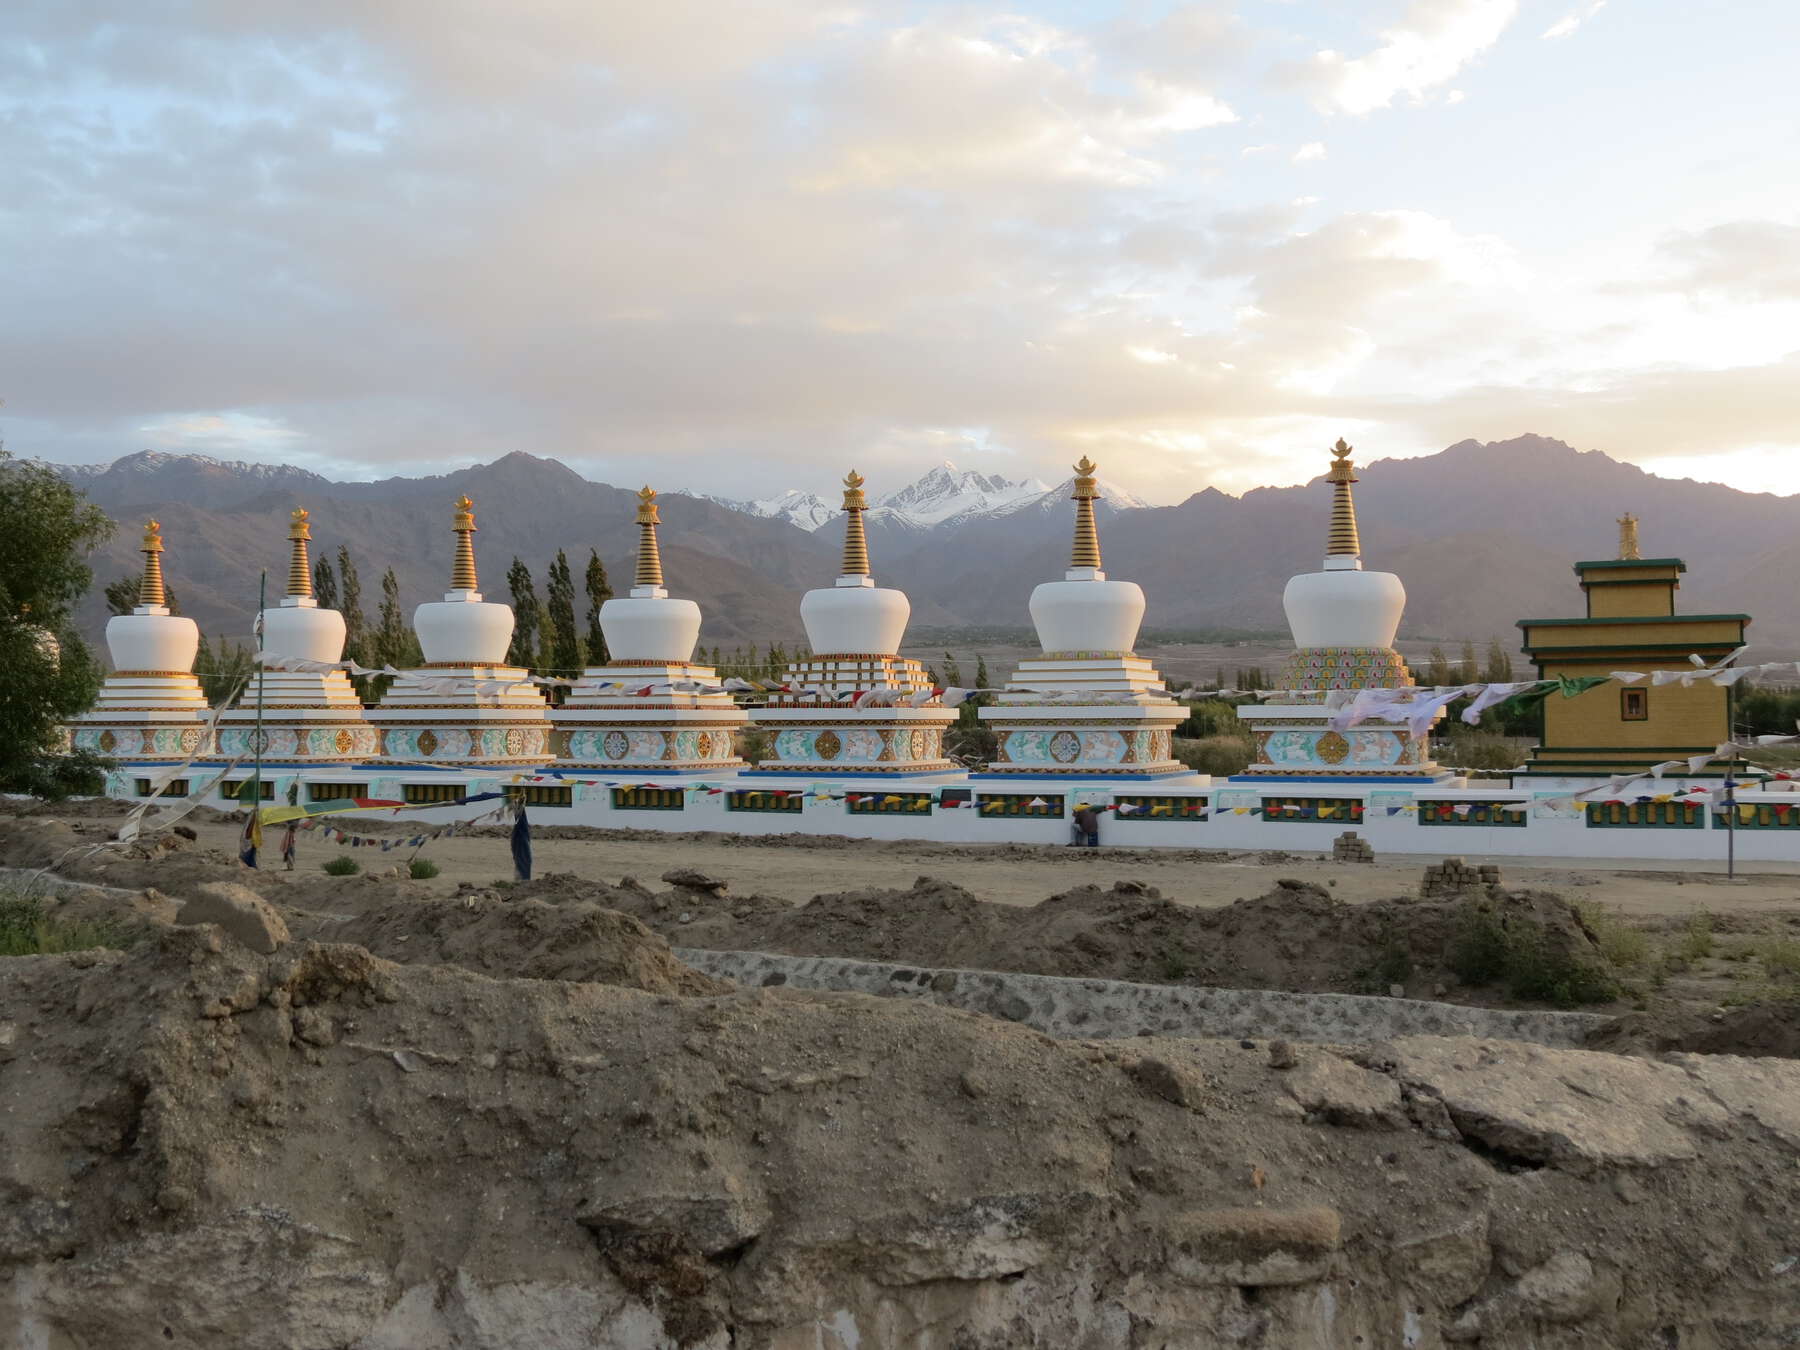 Seven decorated stupas and a small square building lined up consecutively, with a scenic view of a mountain ridge at dawn.